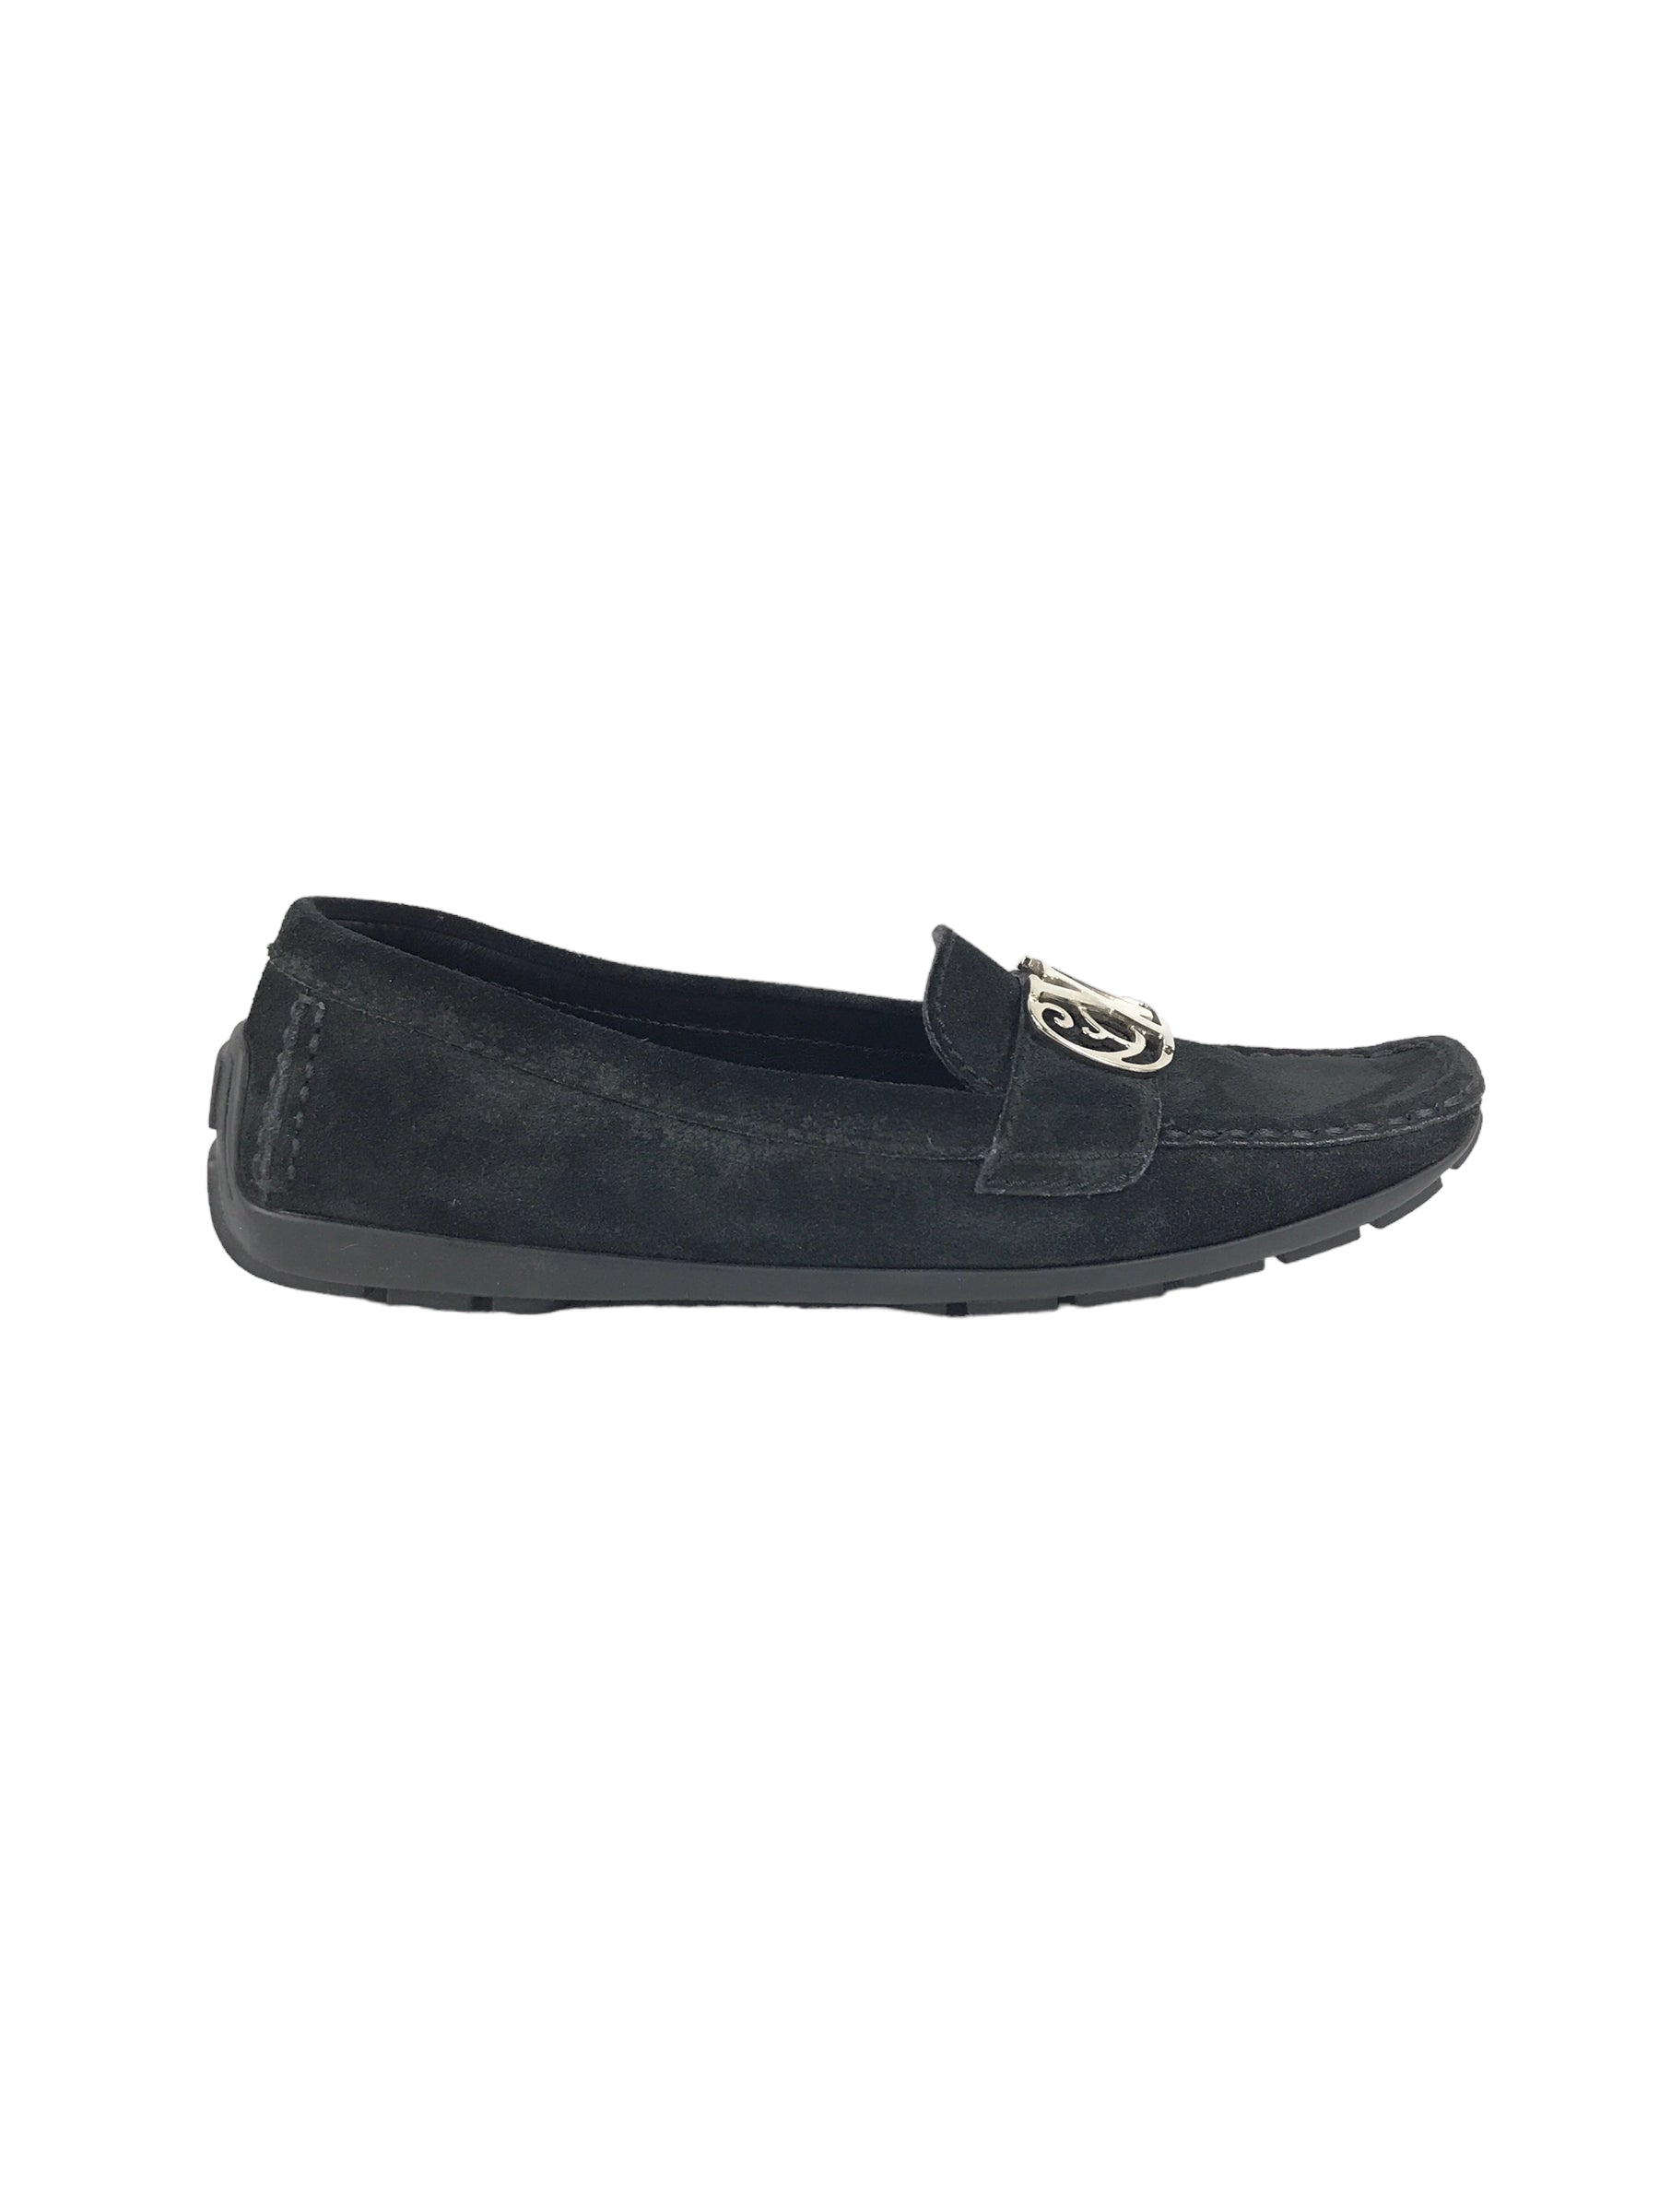 Monogram Black Suede Drivers Loafers W/SHW